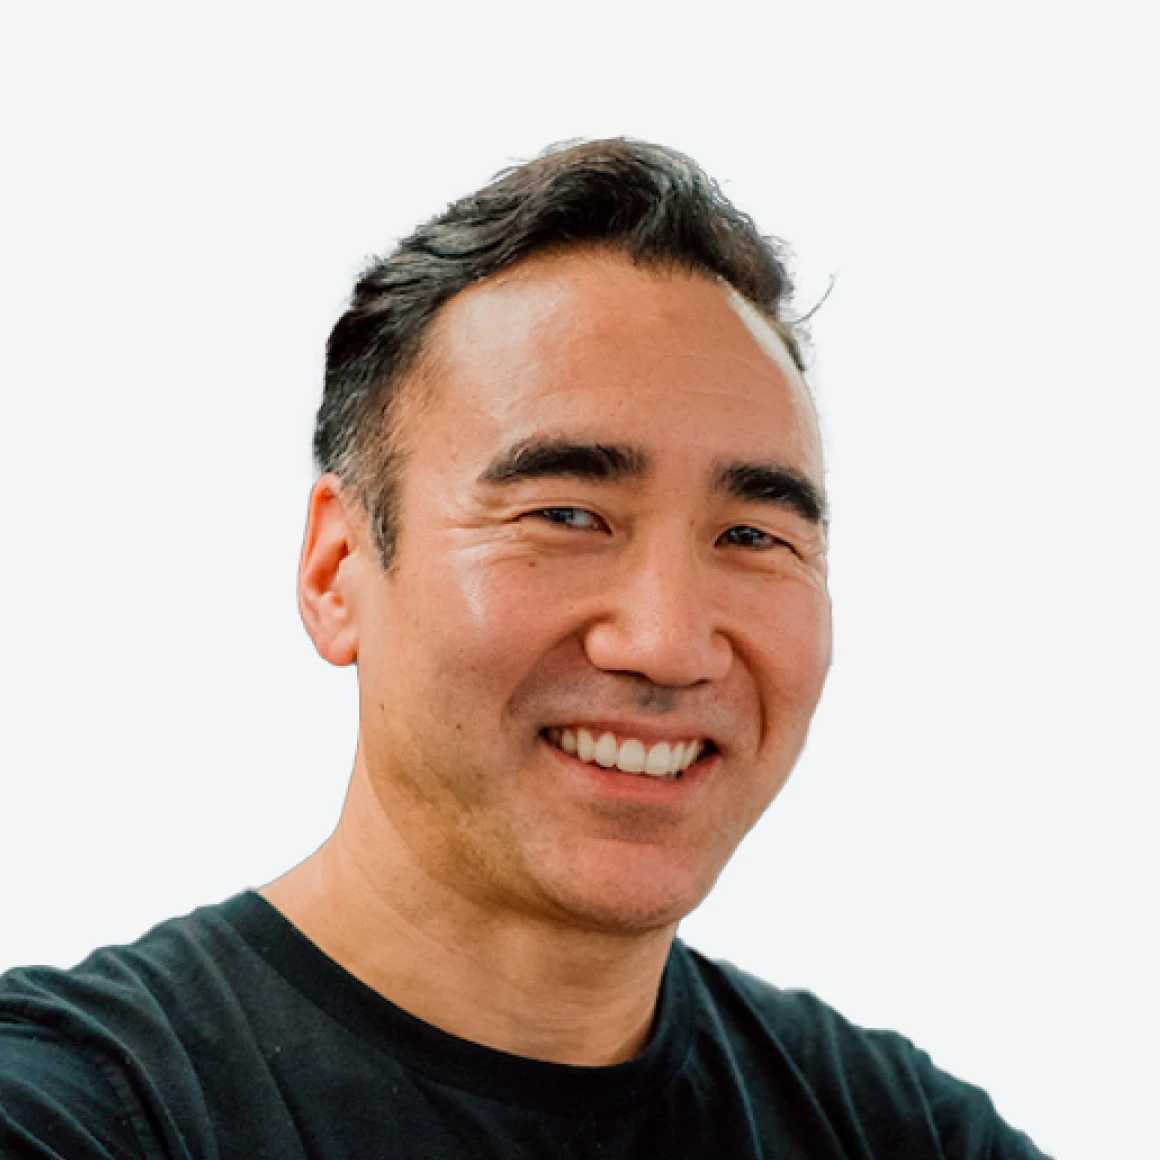 Rei Kasai Vice President/Head of Product and Engineering, Talkdesk